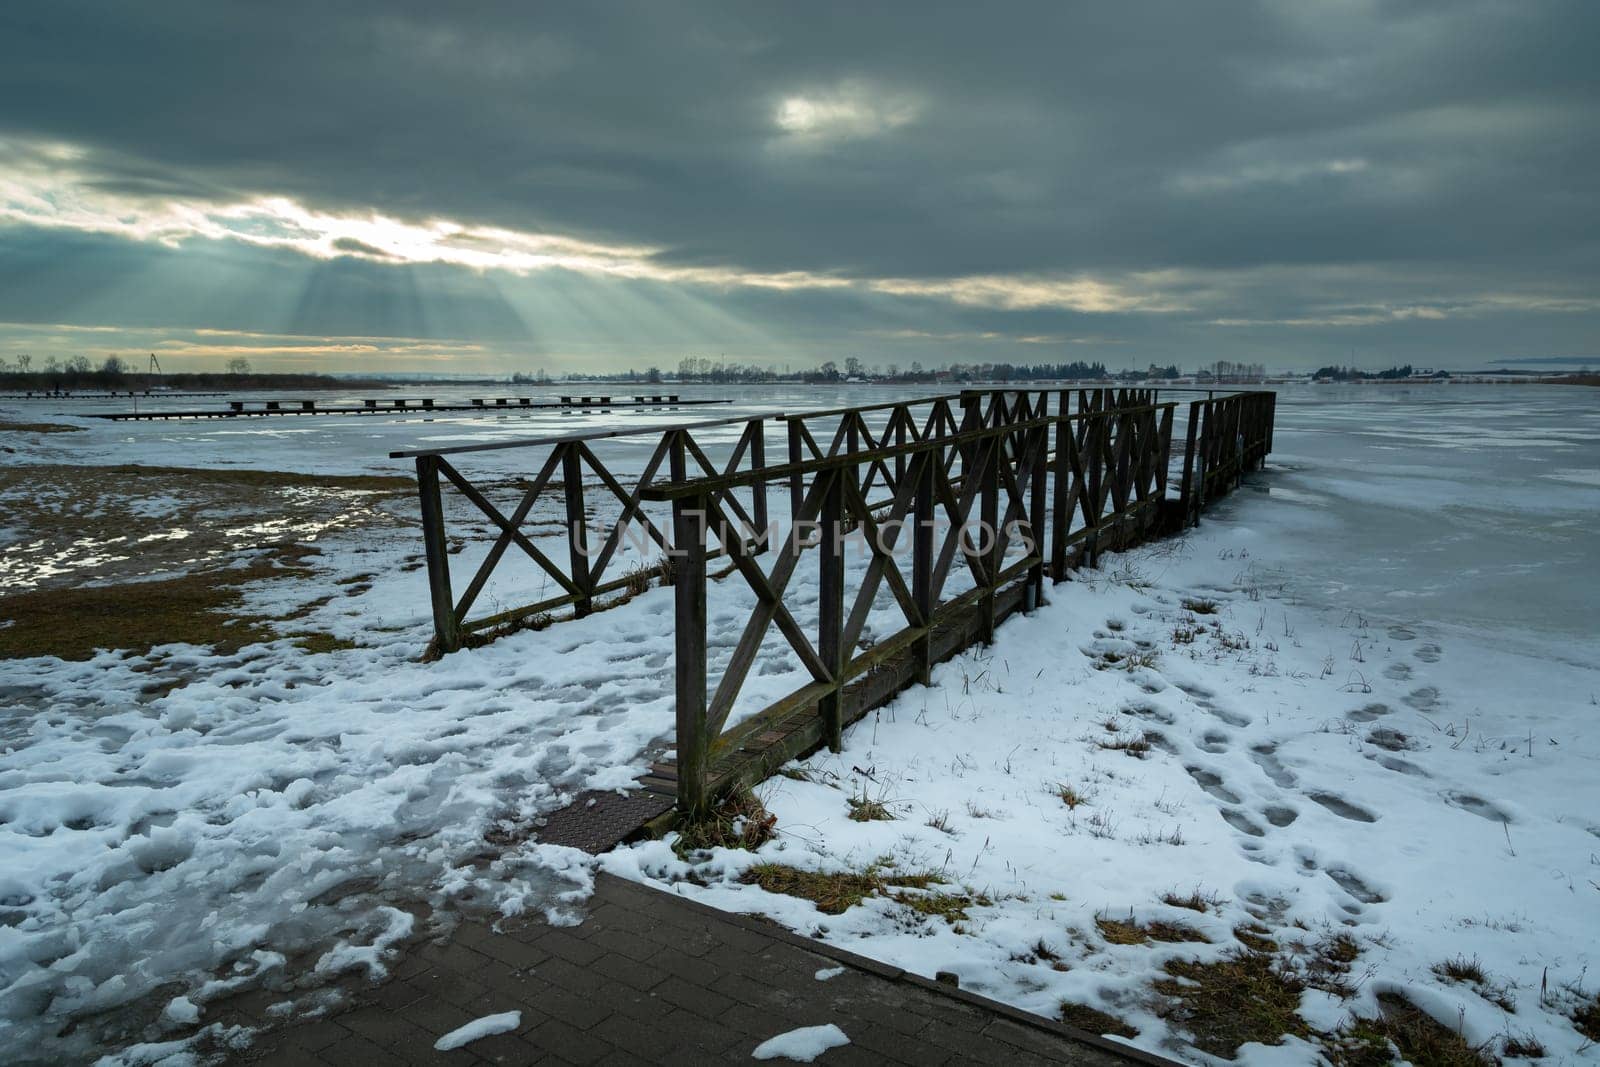 Winter view of a wooden pier and a frozen lake, sunbeams in the clouds, Zoltance, Poland